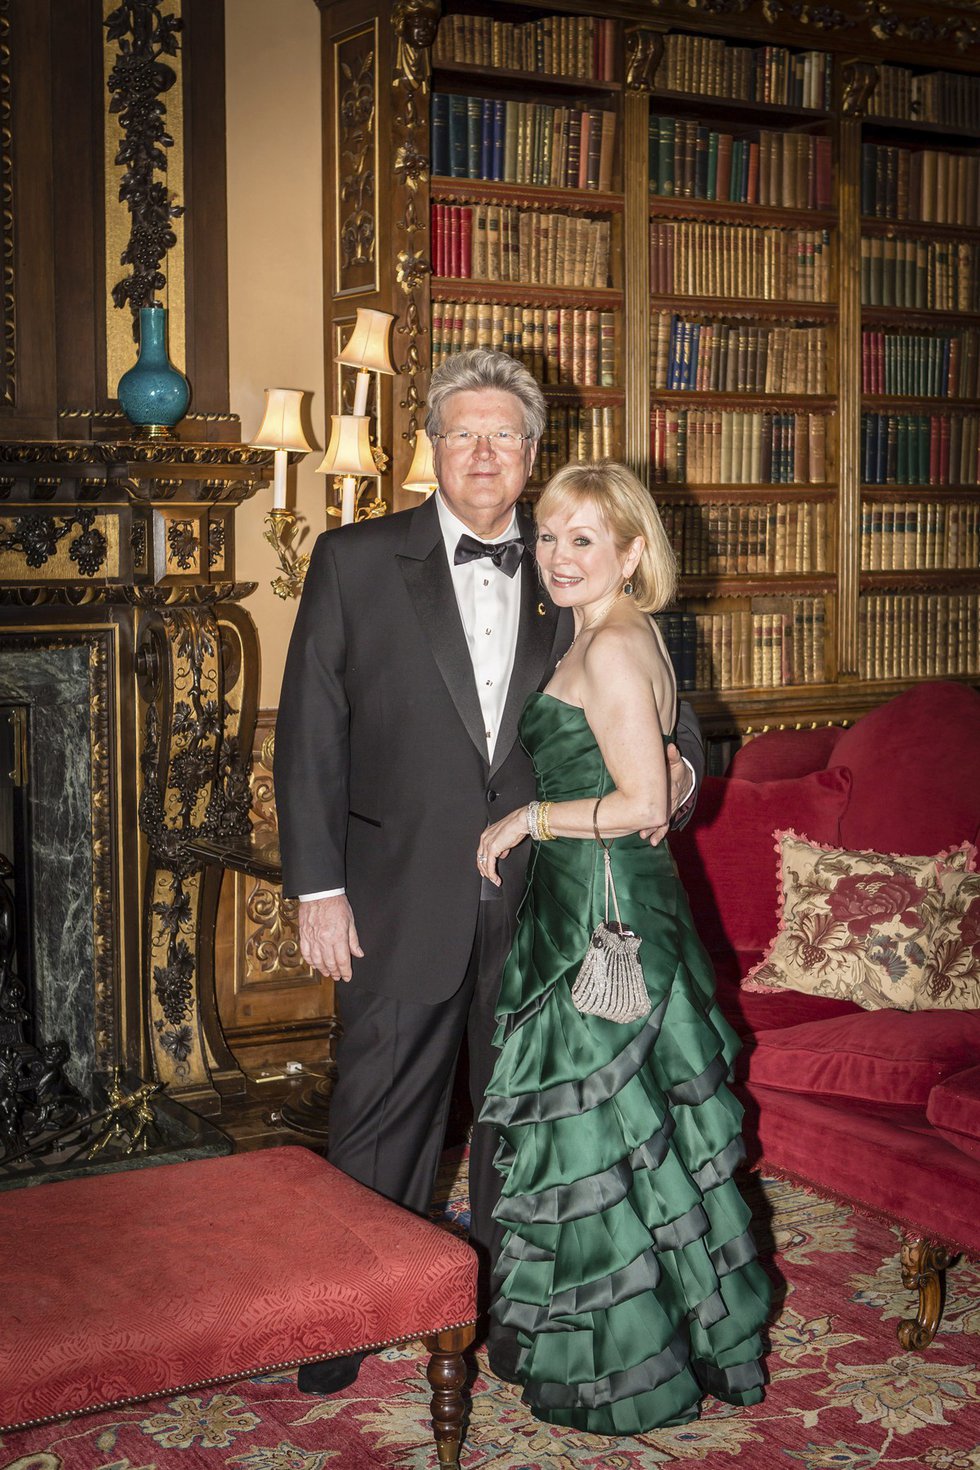 Lord Jeffrey and Lady Mary, the gracious and very glamorous hosts, who are celebrating their 40th wedding anniversary, look every bit their aristocratic parts, as they take time out to pose together in front of the library’s fireplace.